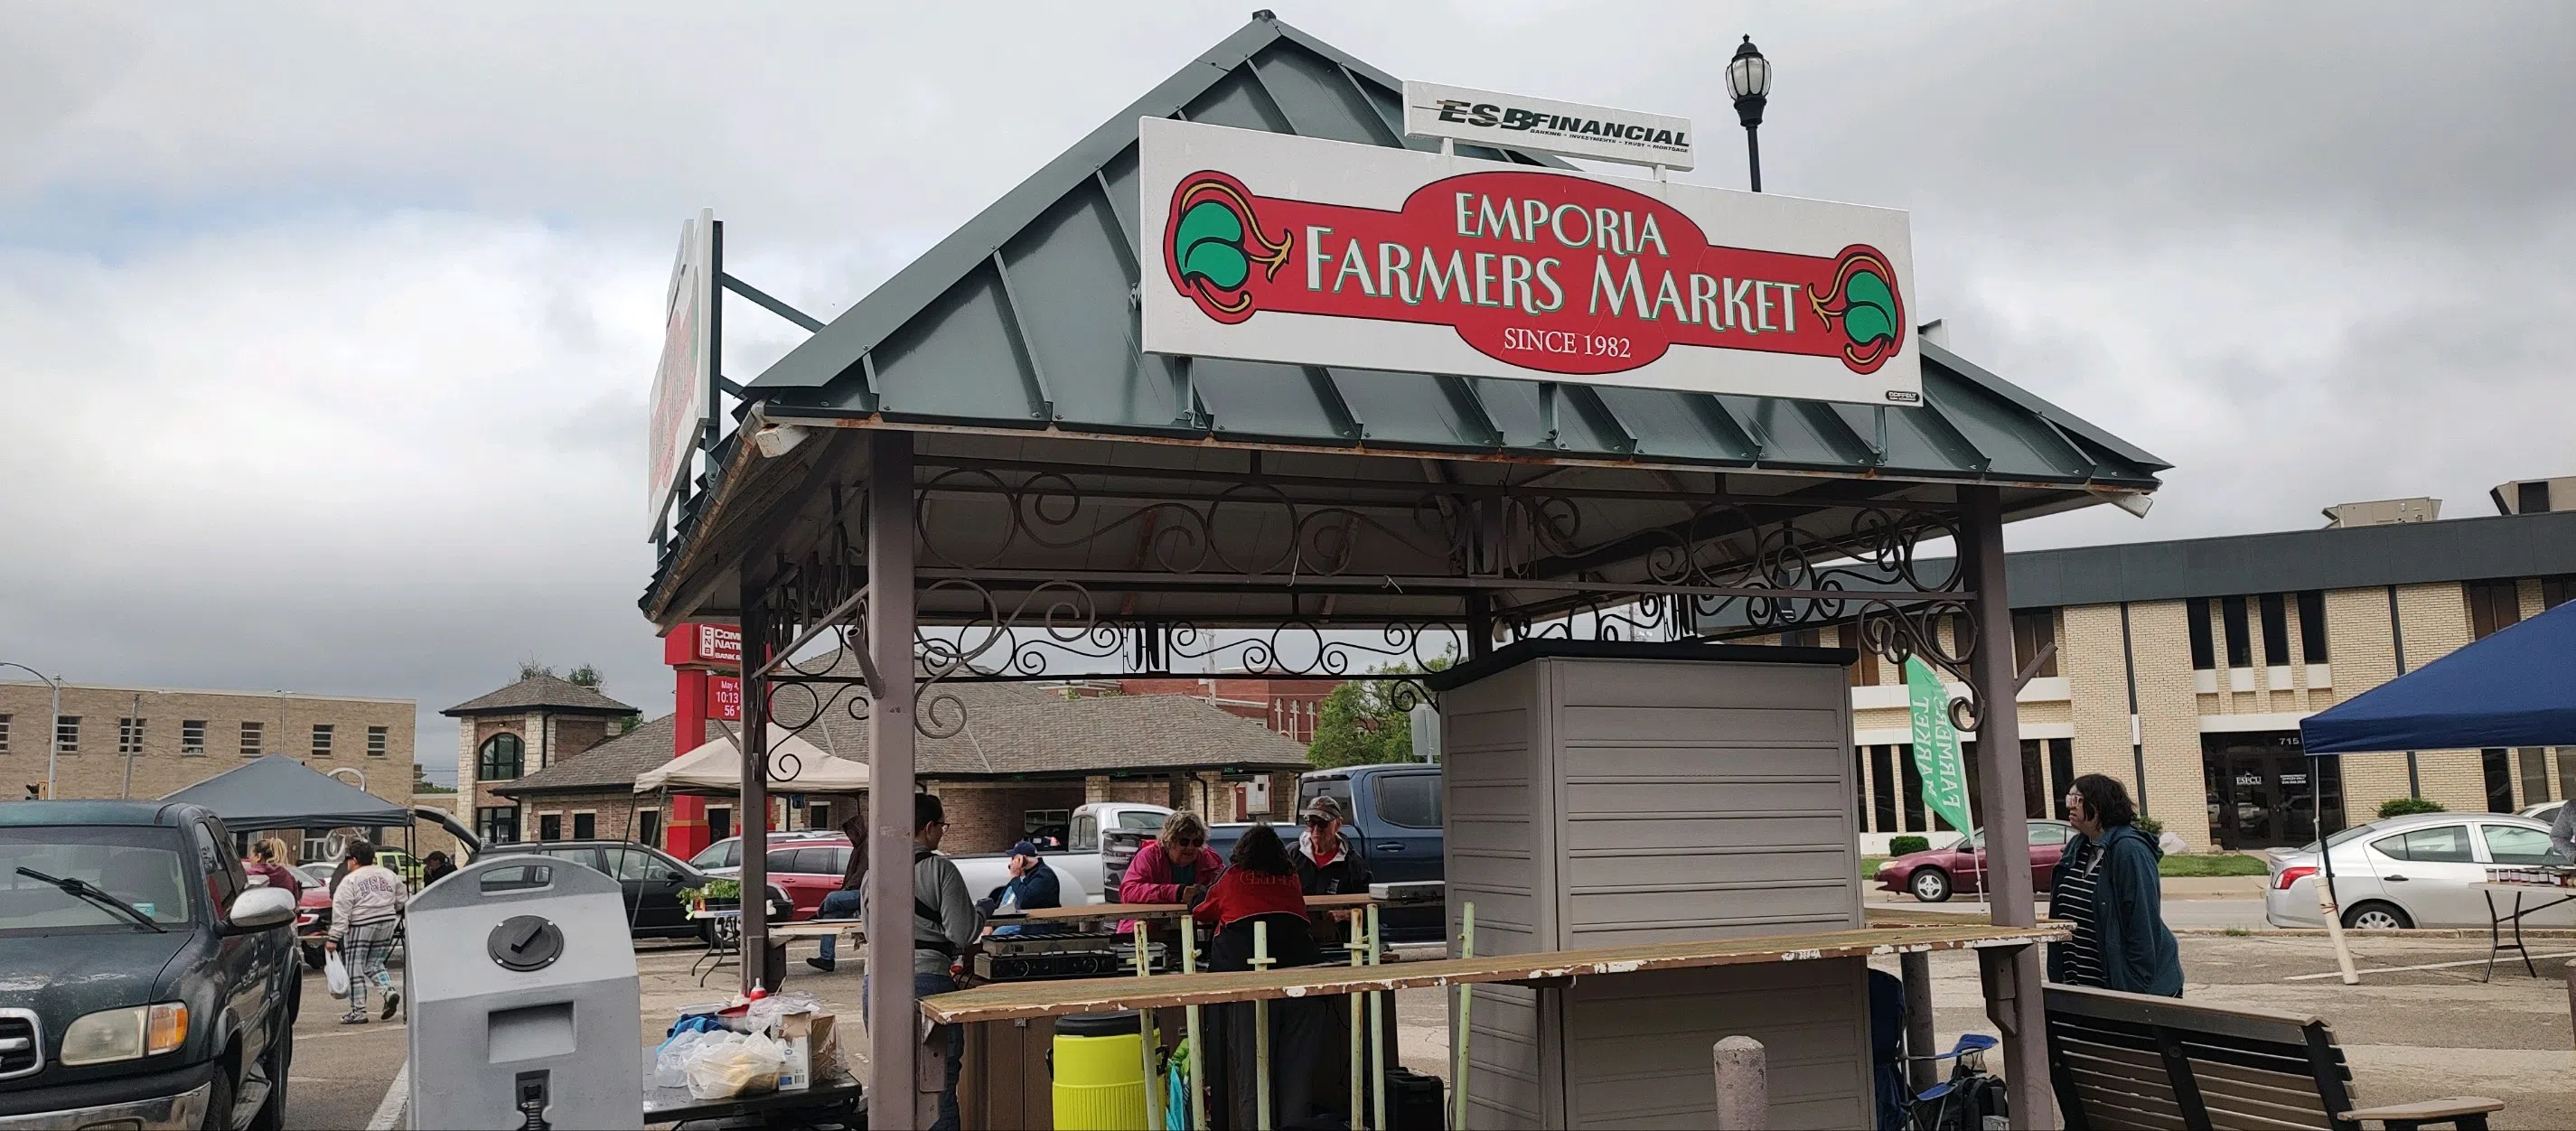 Cloudy skies and morning drizzle couldn't wash away excitement at the start of the 42nd regular Emporia Farmers Market Season